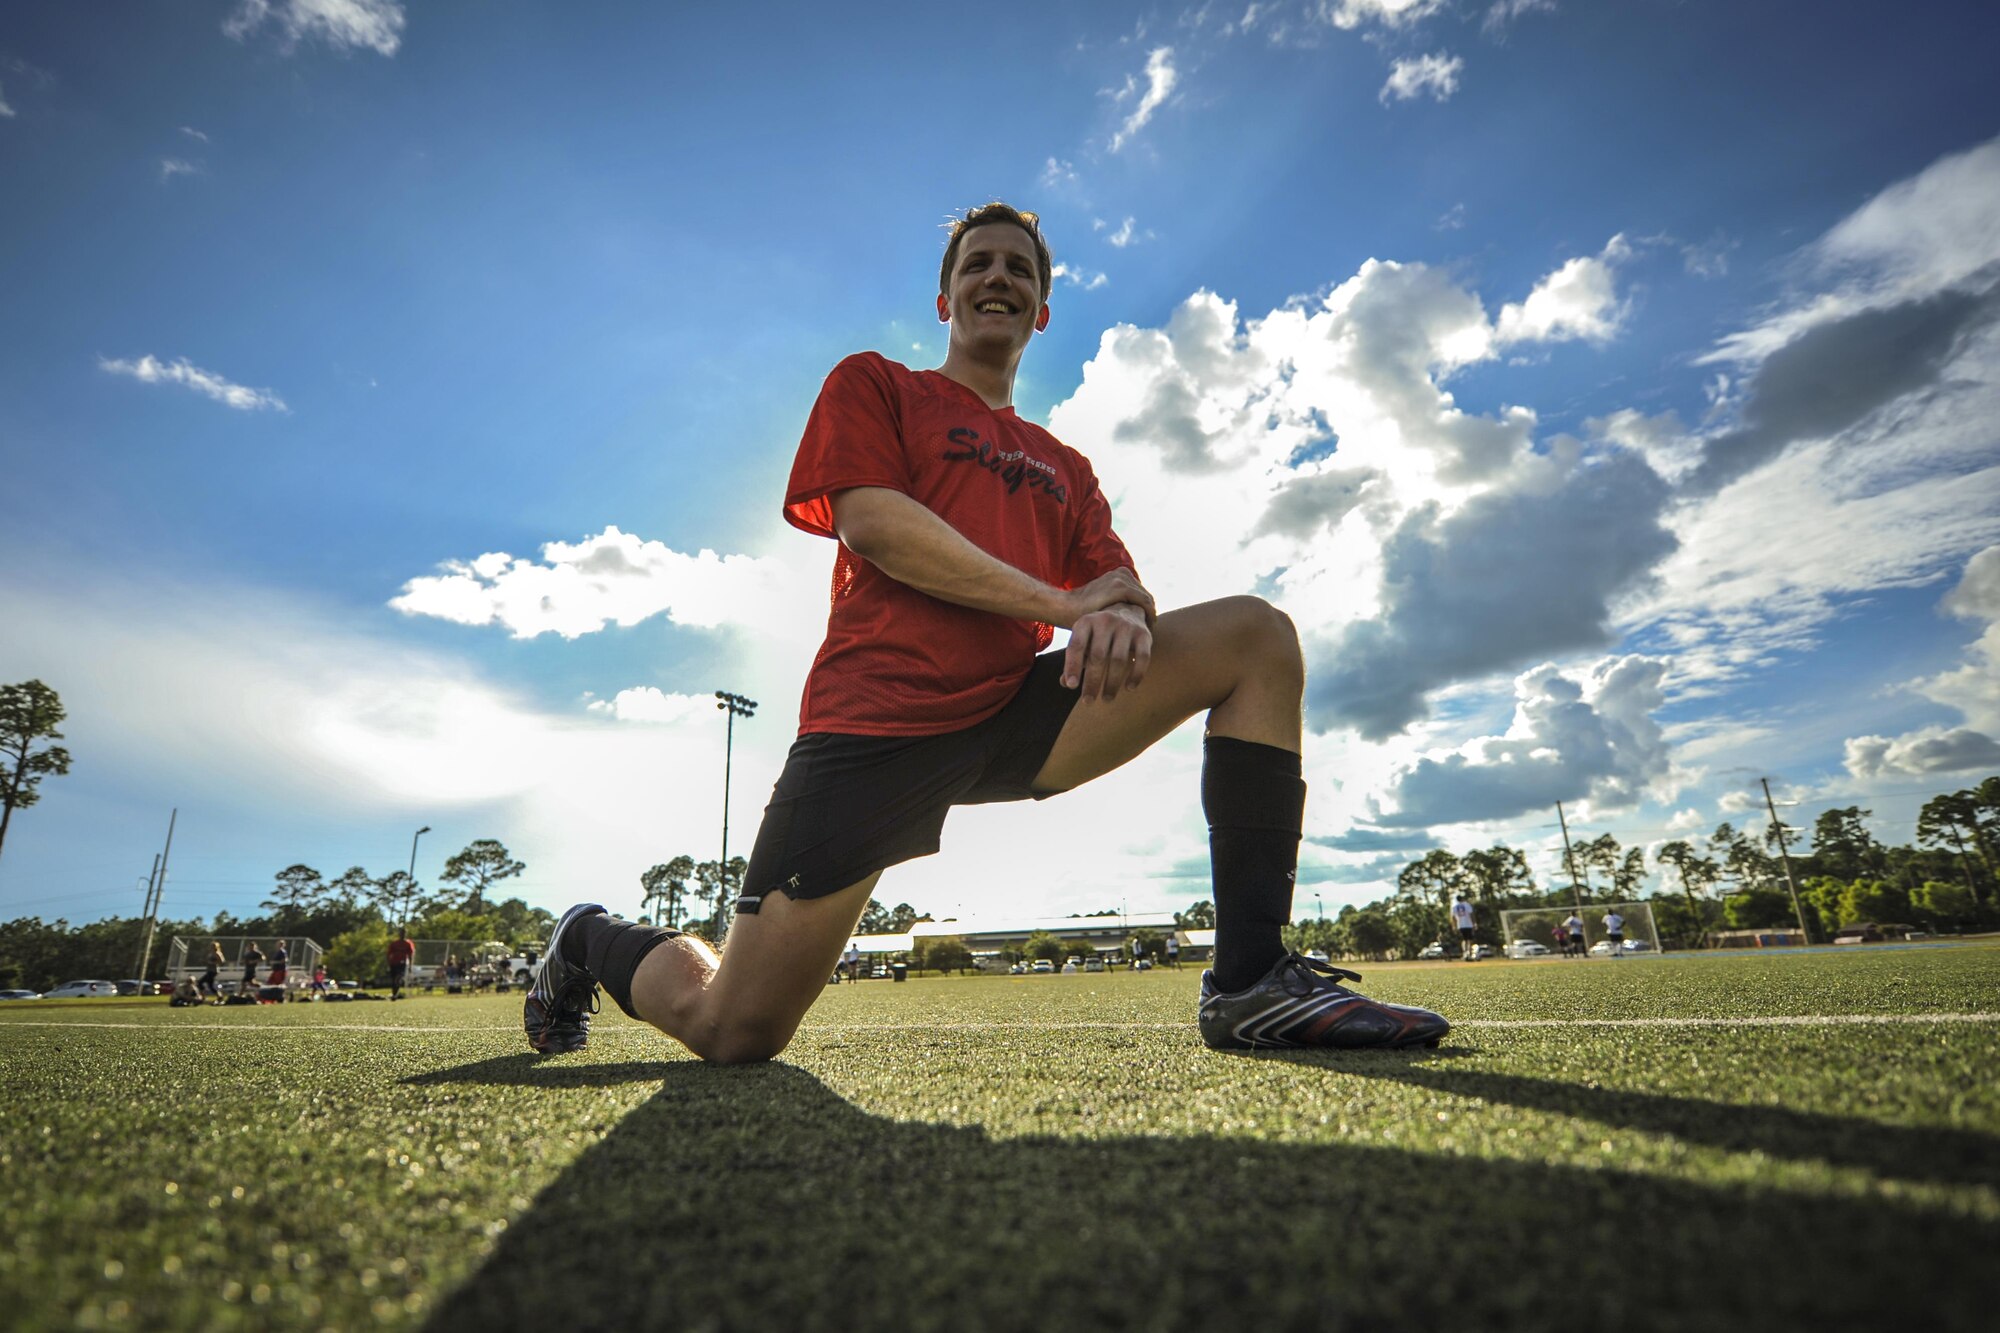 Steve Strube, a member of the 319th Special Operations Squadron’s intramural soccer team, stretches before the 2016 Intramural Soccer Championship at Hurlburt Field, Fla., Sept. 13, 2016. The 319th SOS was undefeated all season until the 1st Special Operations Medical Group defeated them in a double elimination match-up. (U.S. Air Force photo by Airman 1st Class Joseph Pick)
